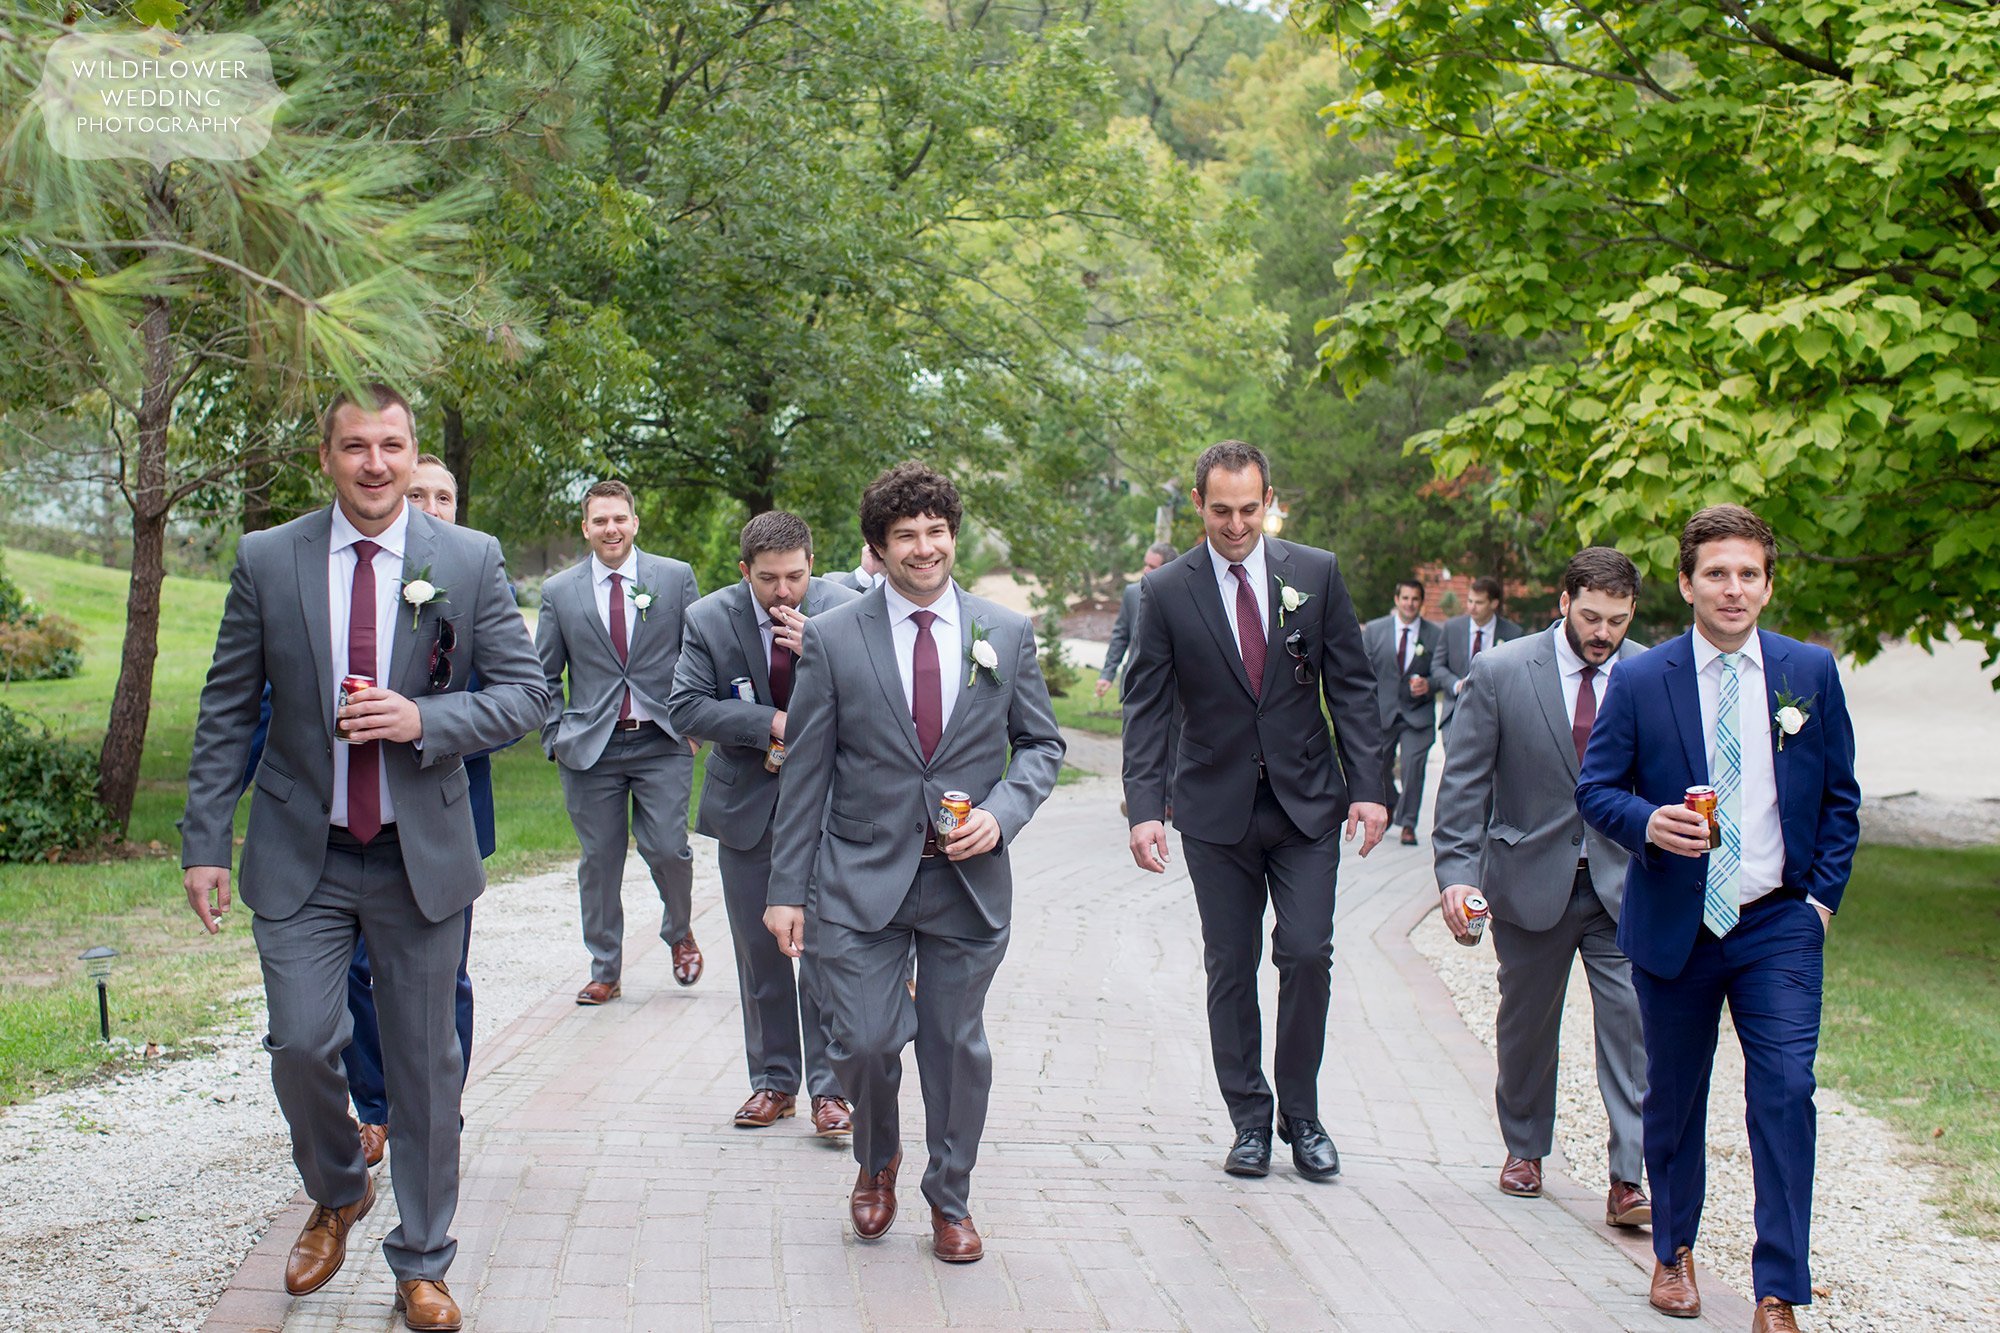 Groomsmen walk up the path at the outdoor Little Piney Lodge wedding venue.